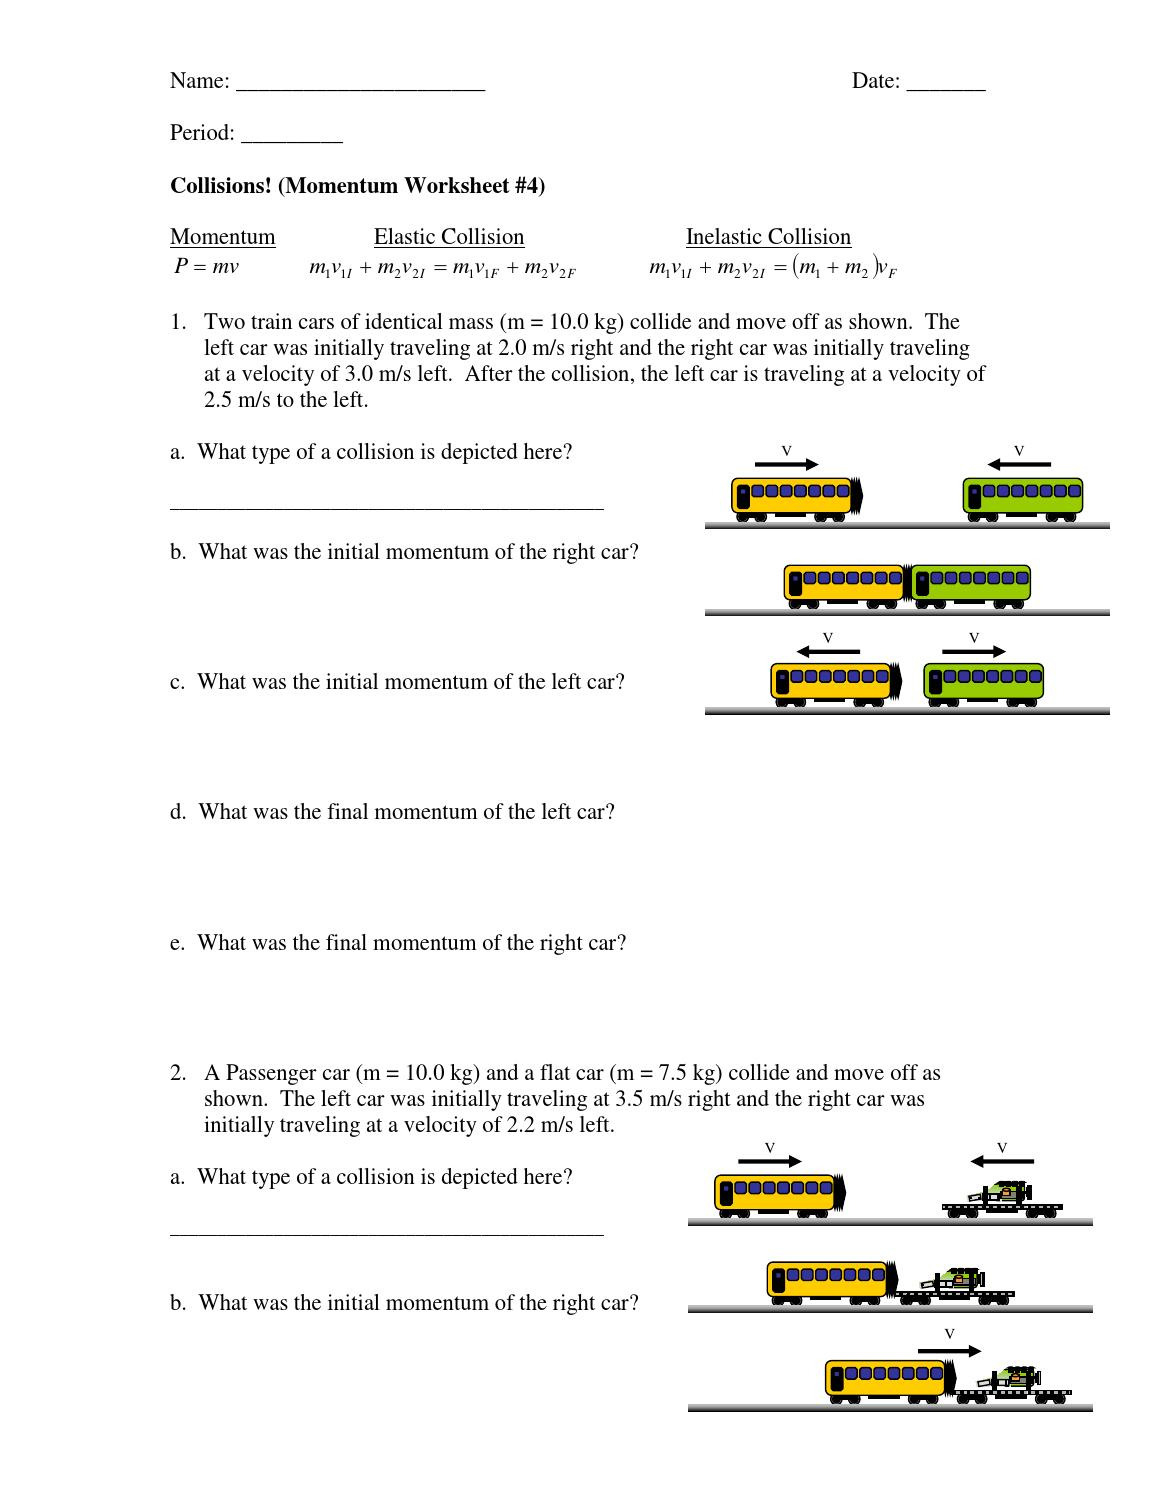 Collisions Momentum Worksheet 4 Answers | db-excel.com